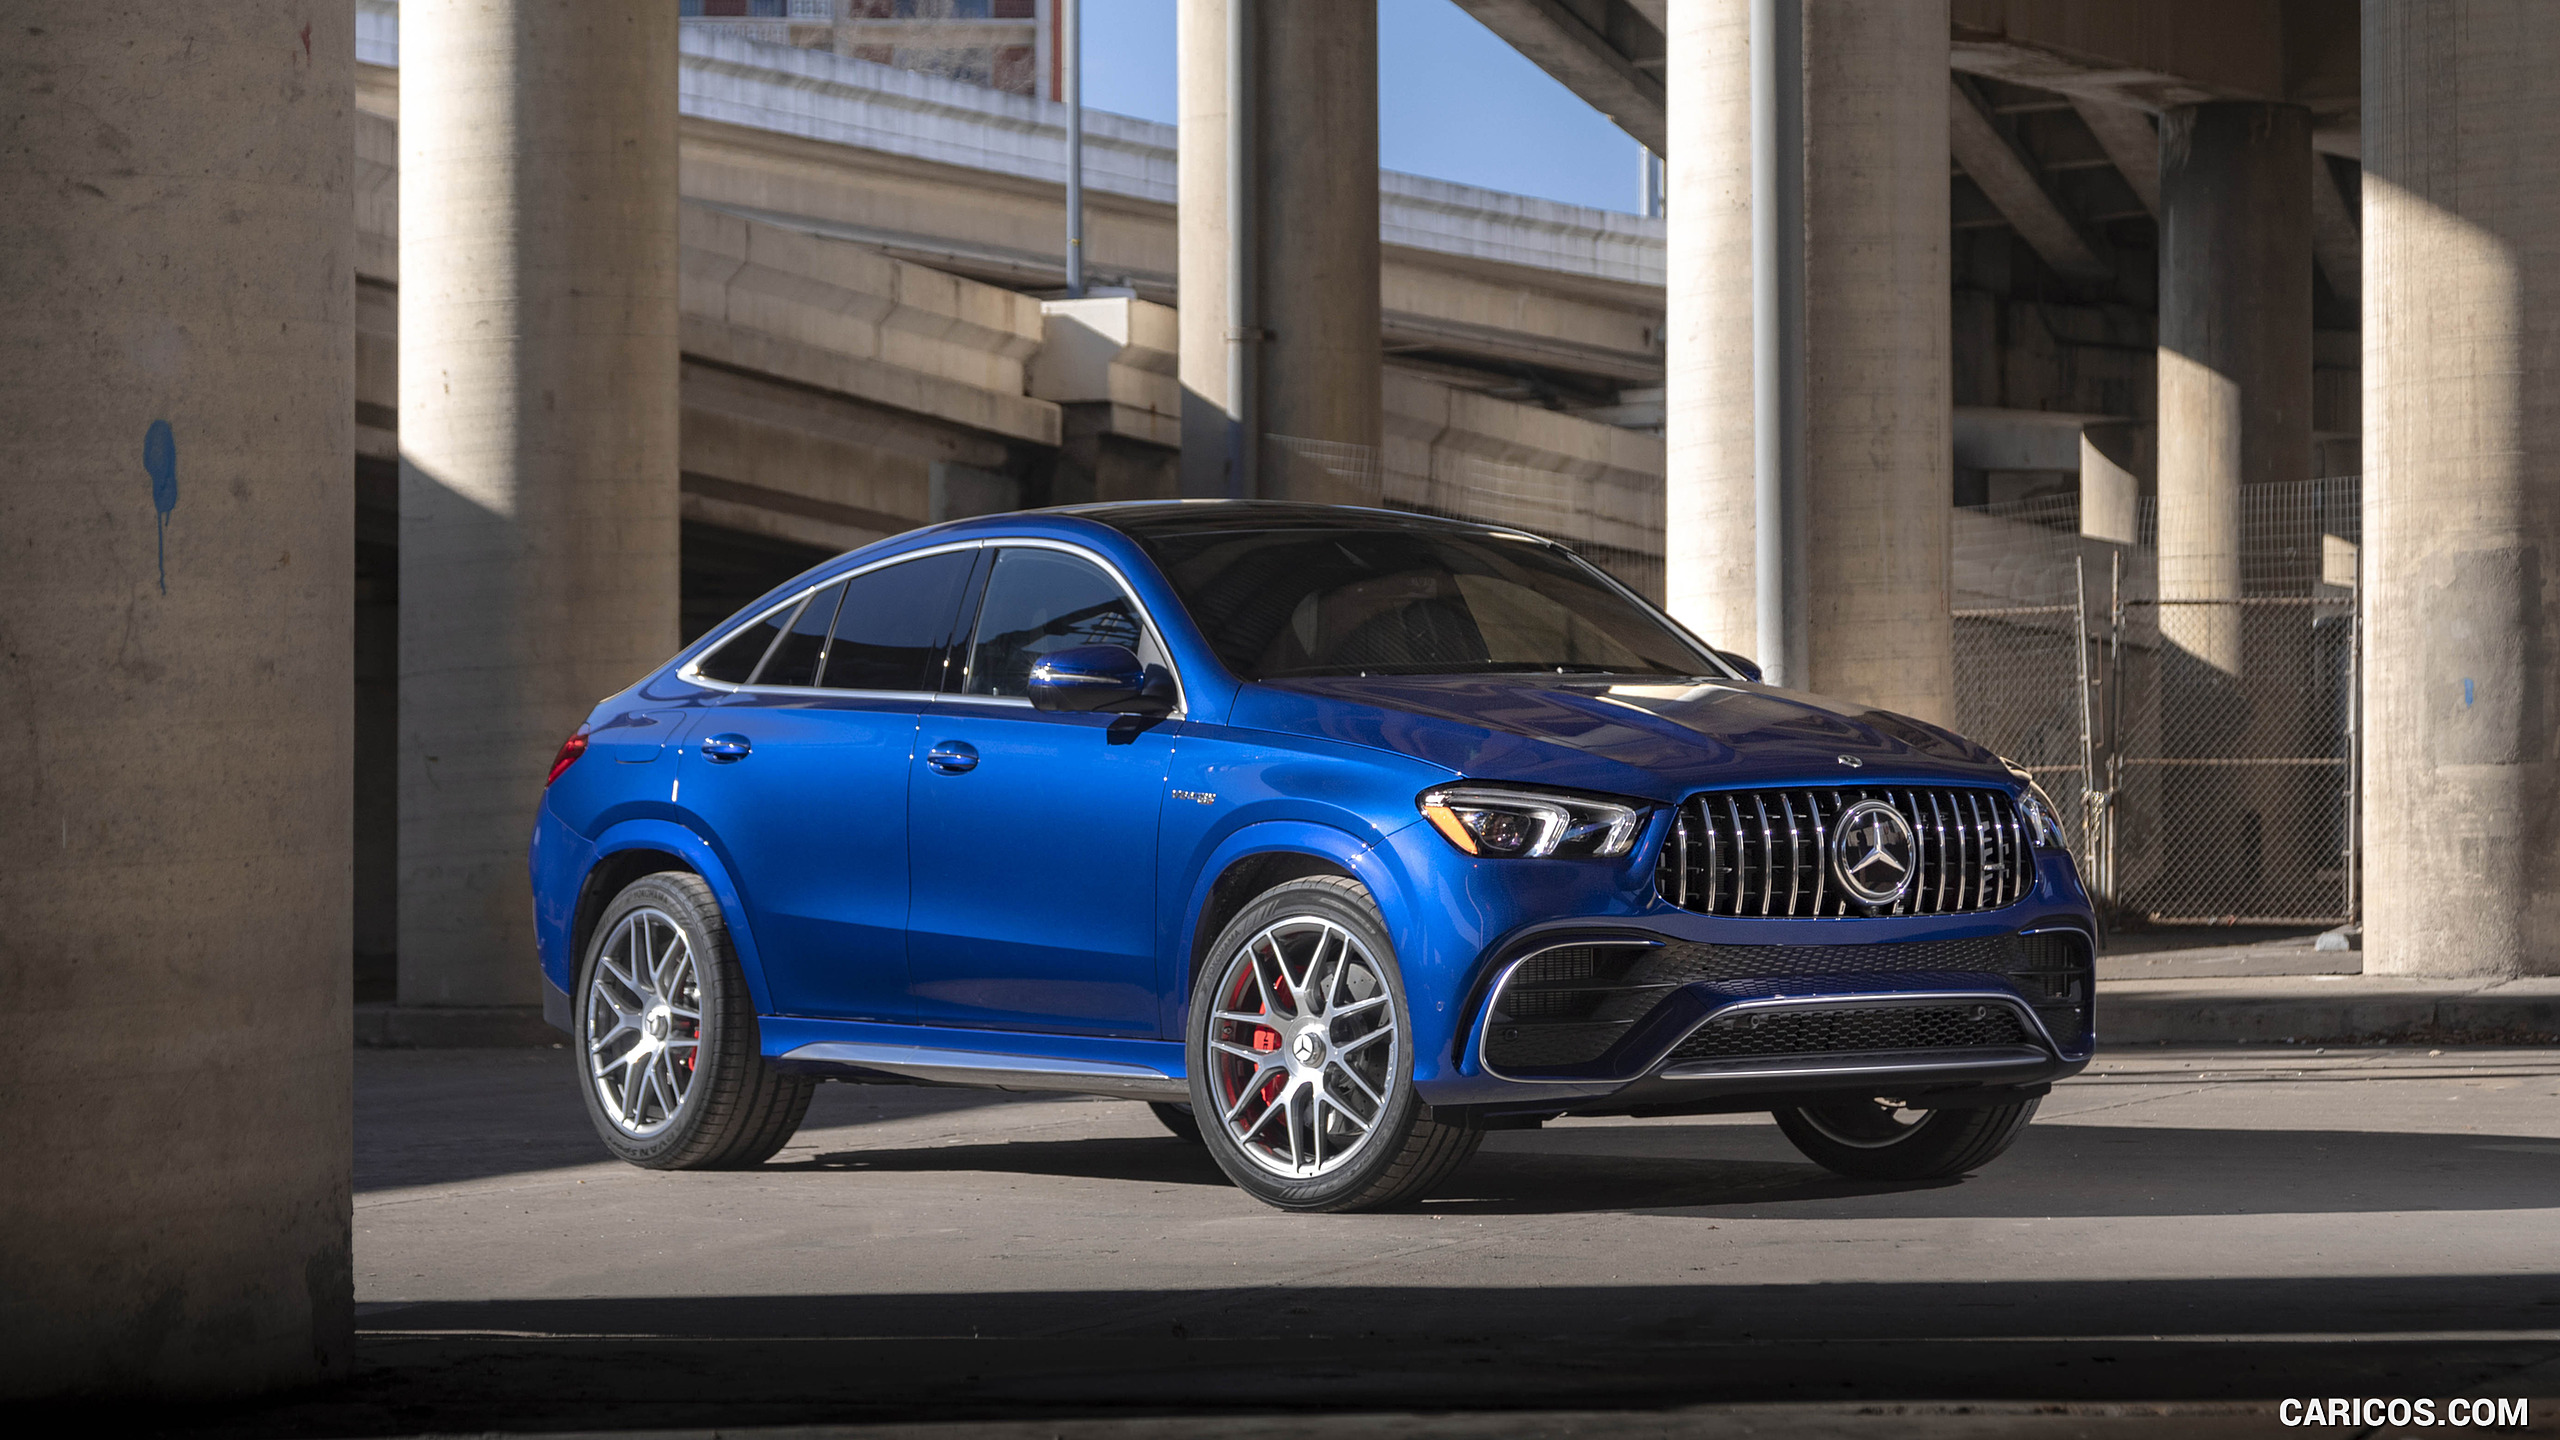 2021 Mercedes-AMG GLE 63 S Coupe (US-Spec) - Front Three-Quarter, #40 of 66